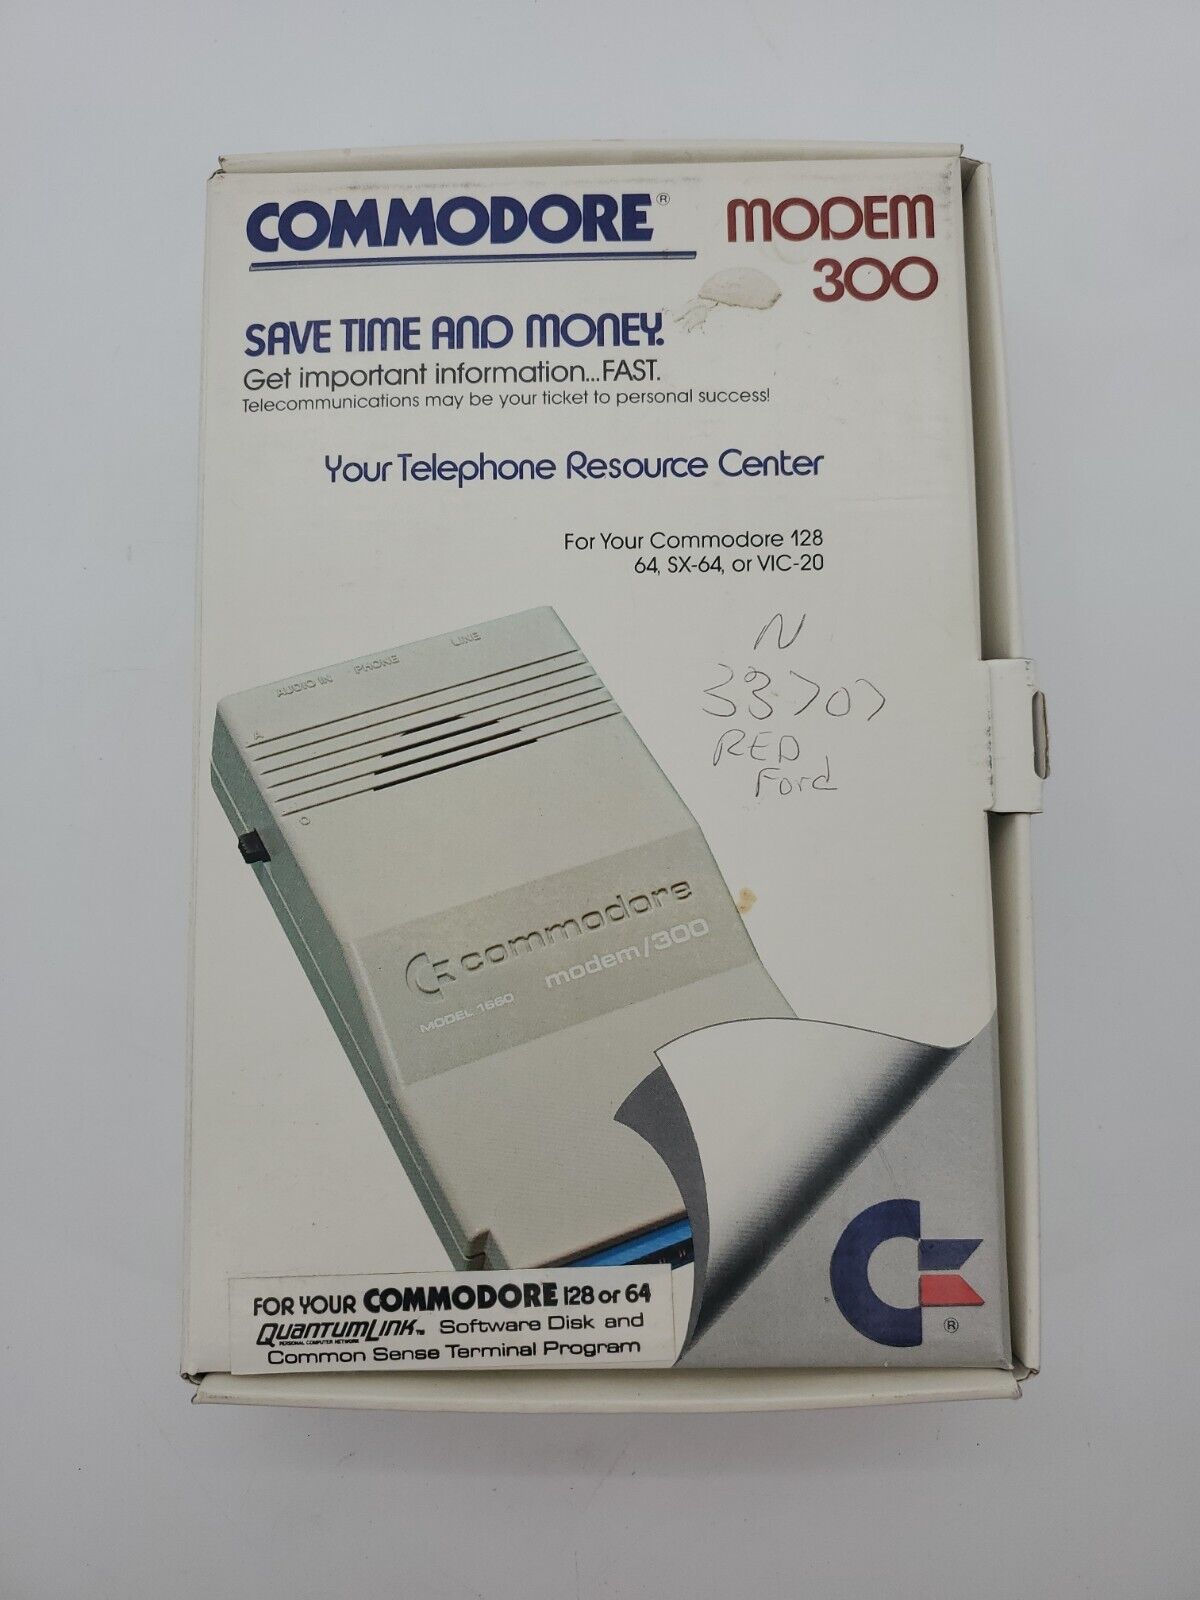 Vintage 1985 Commodore Modem 300 Model 1660 Untested Box, manuals & cables